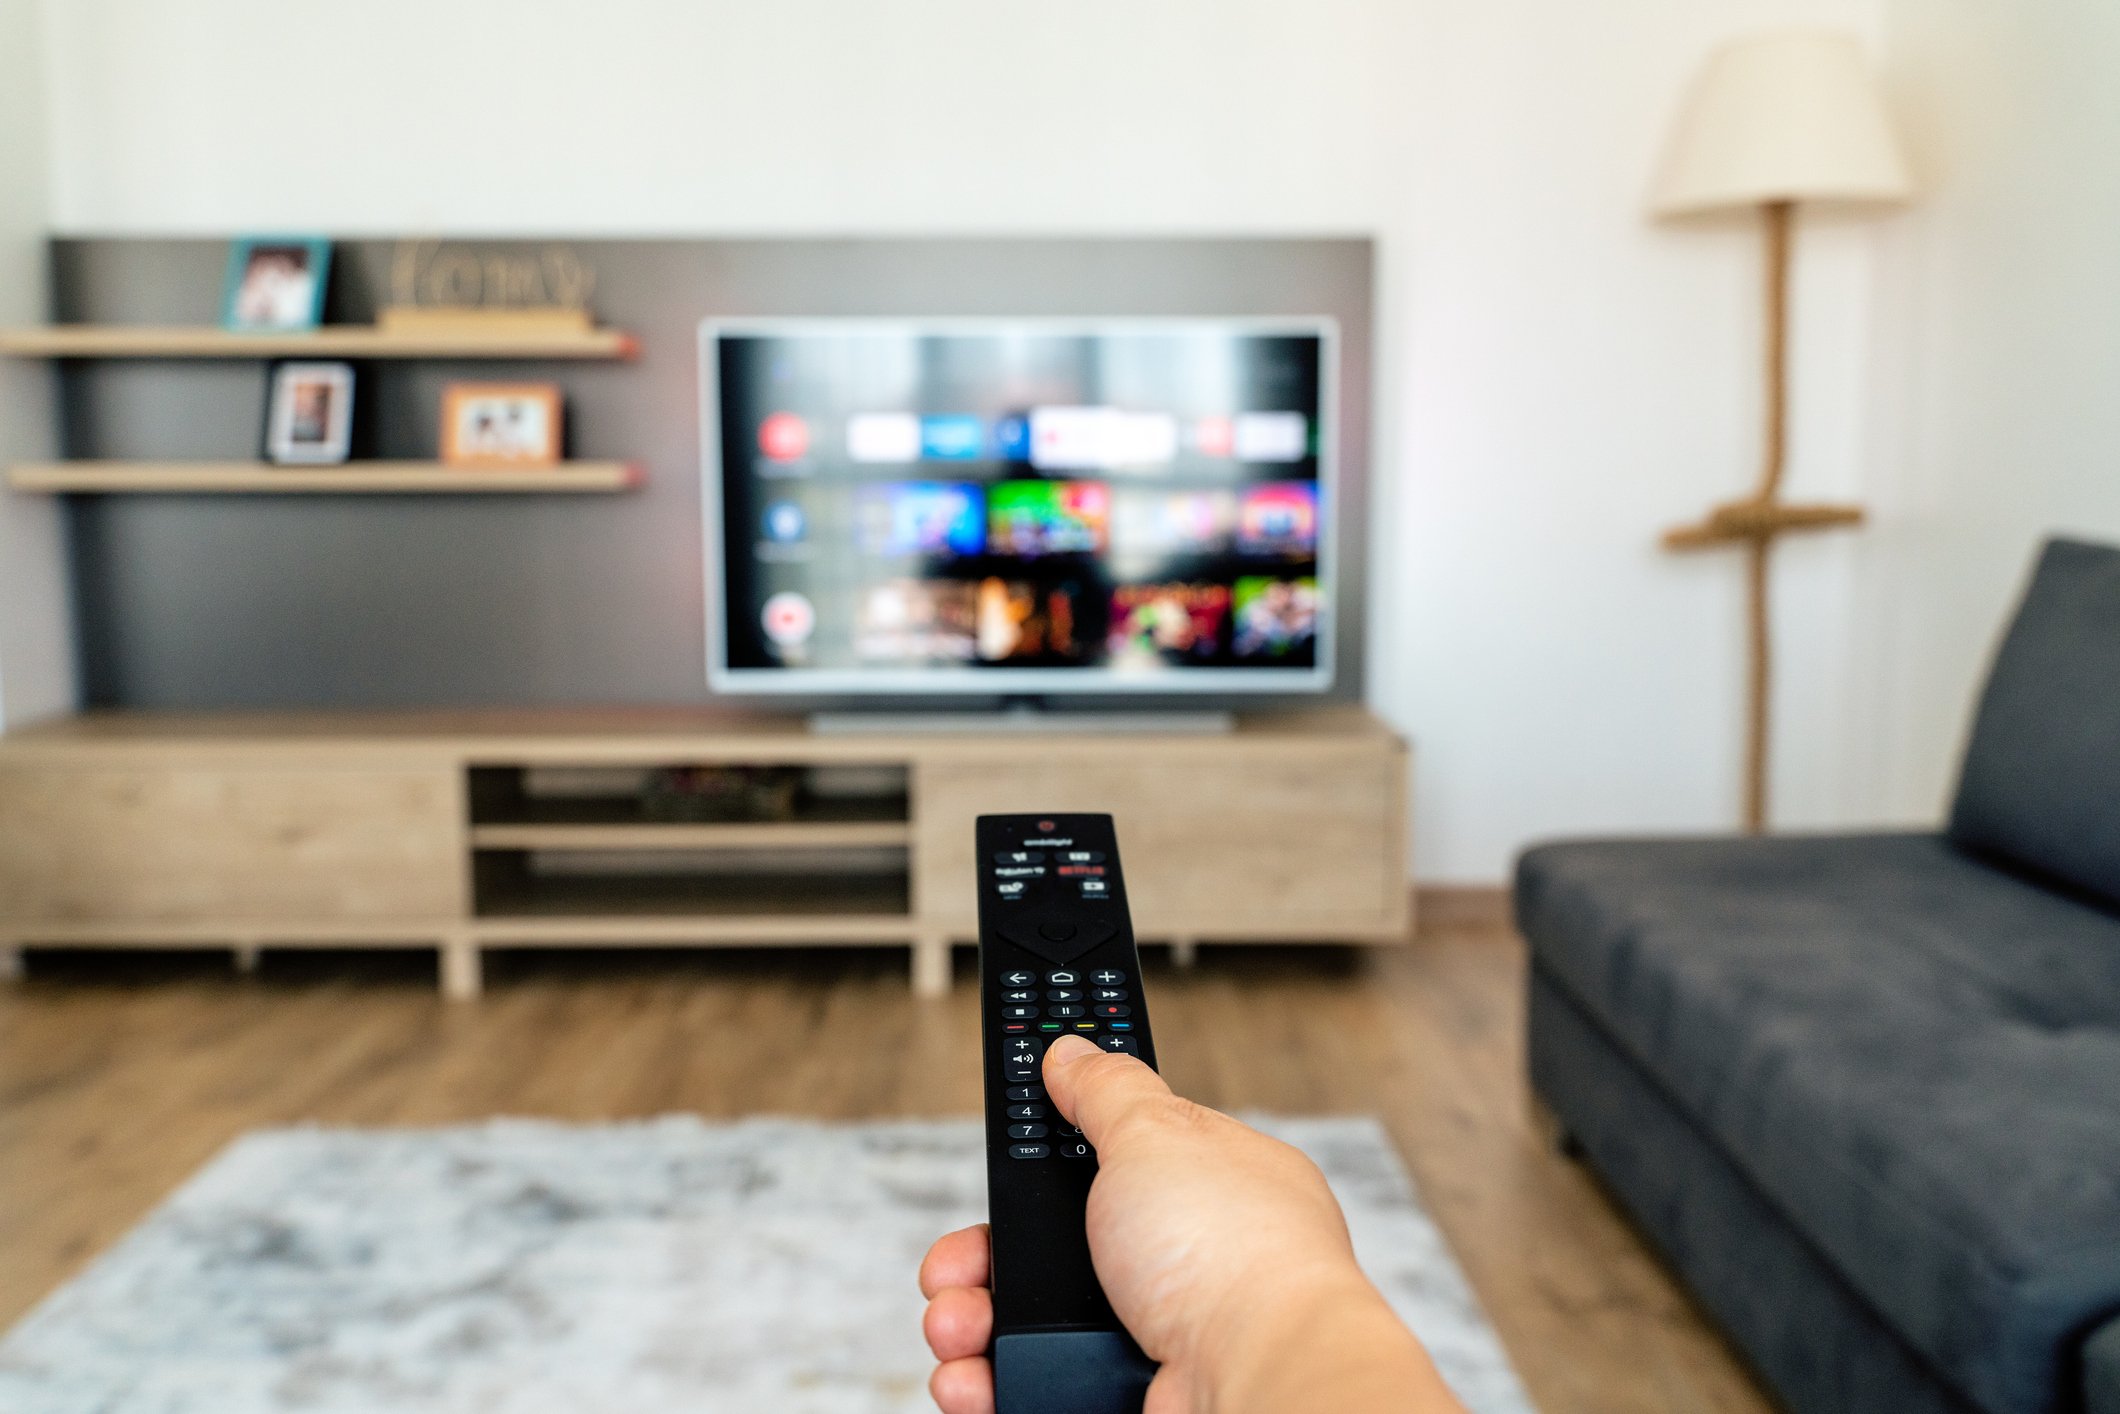 Smart TV apps surpass set-top boxes as entry point for TV viewing